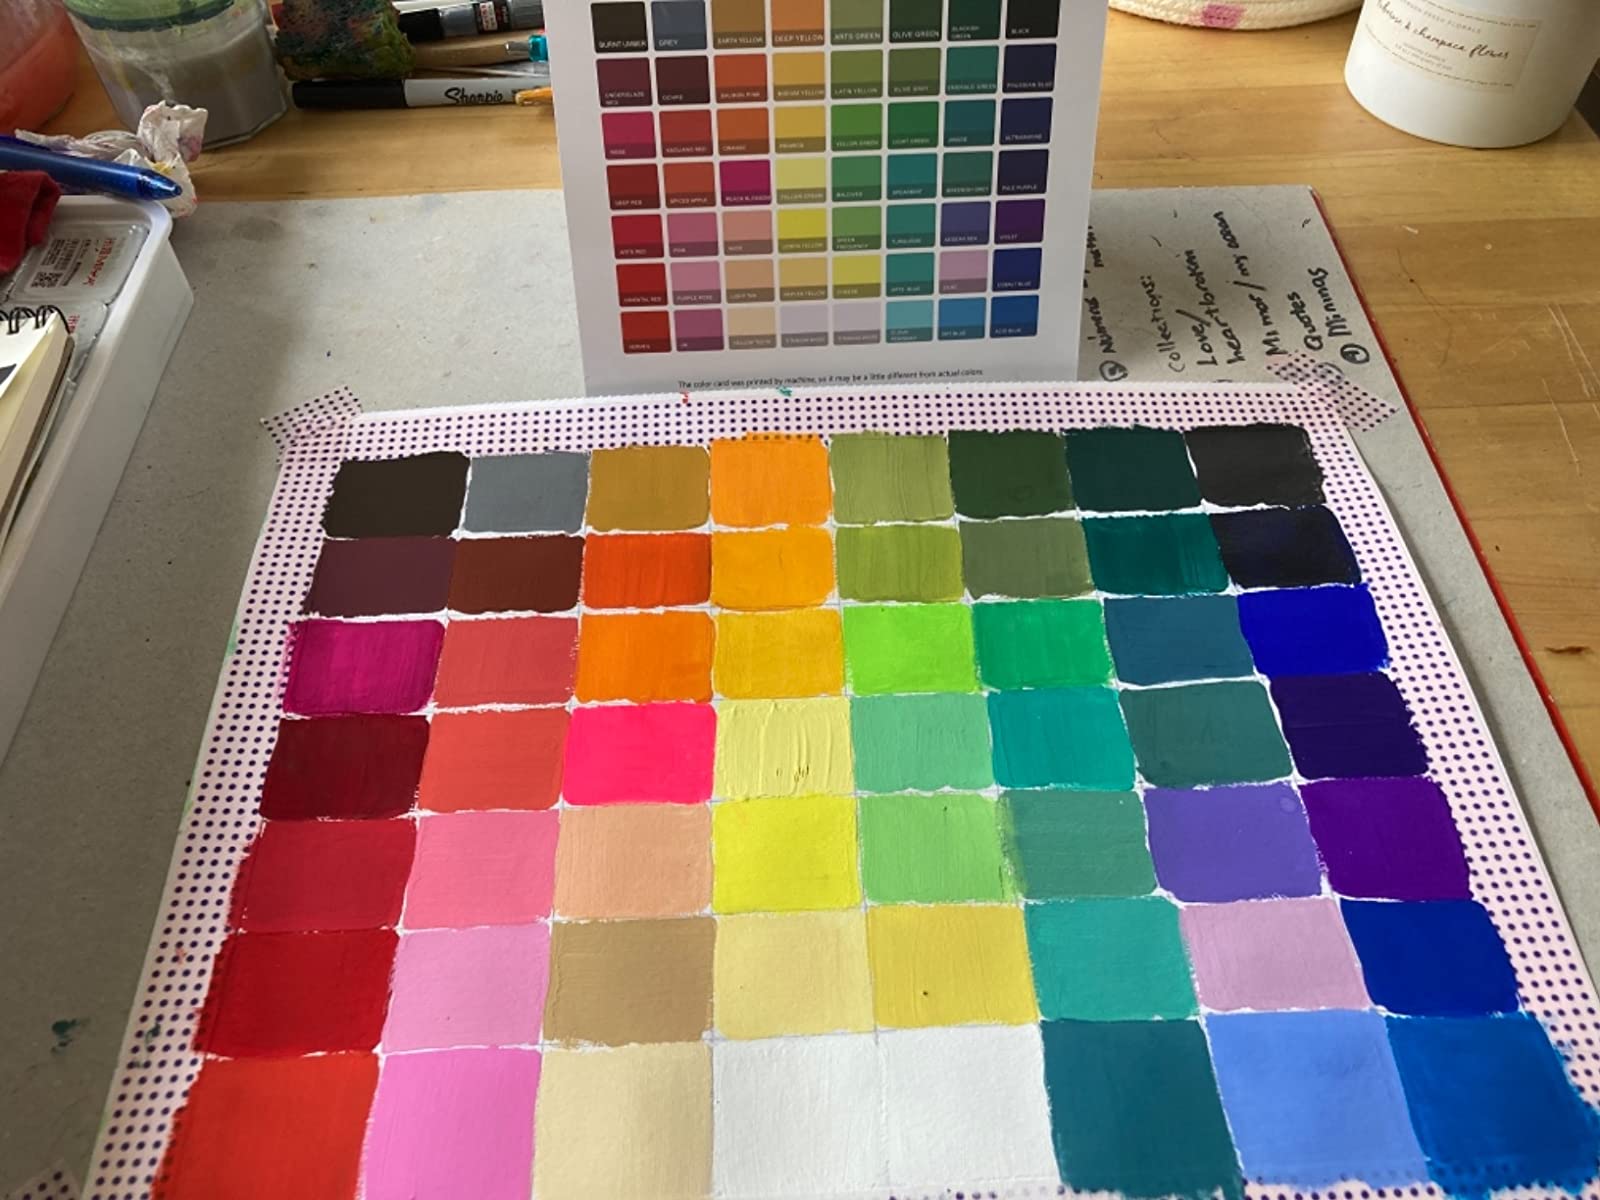  AOOK HIMI MIYA Gouache Paint Set, 56 Colors x 30ml Unique Jelly  Cup Design in a Carrying Case Perfect for Artists, Students, Gouache Opaque  Watercolor Painting（Comes with red dot drawing plate） 